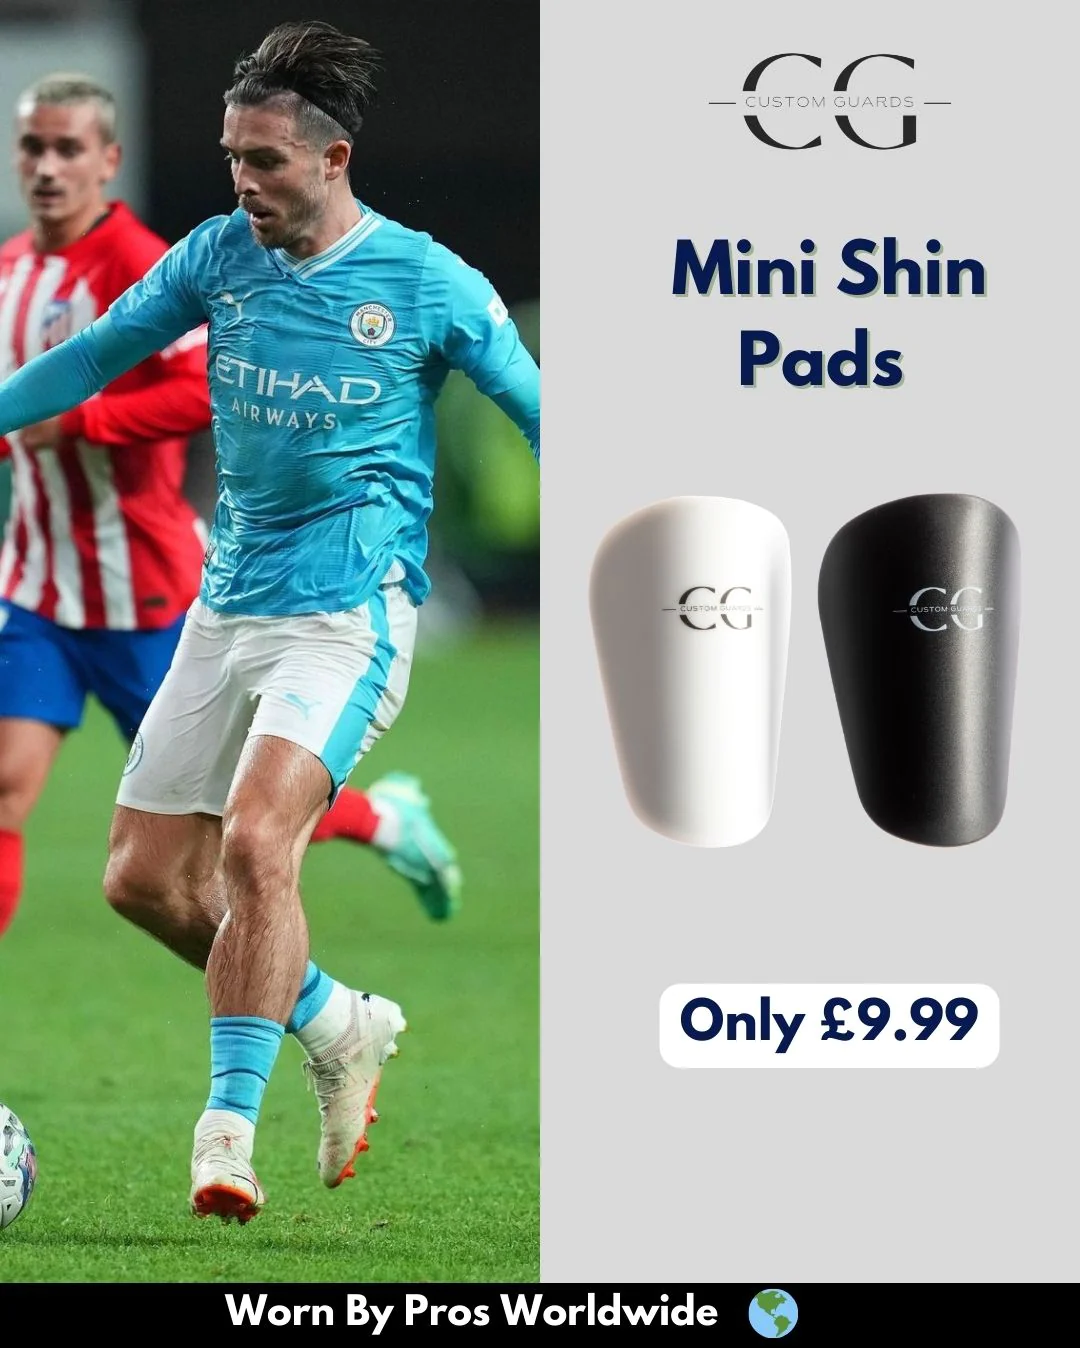 Upgrade Your Game with Custom Guards Mini Shin Pads